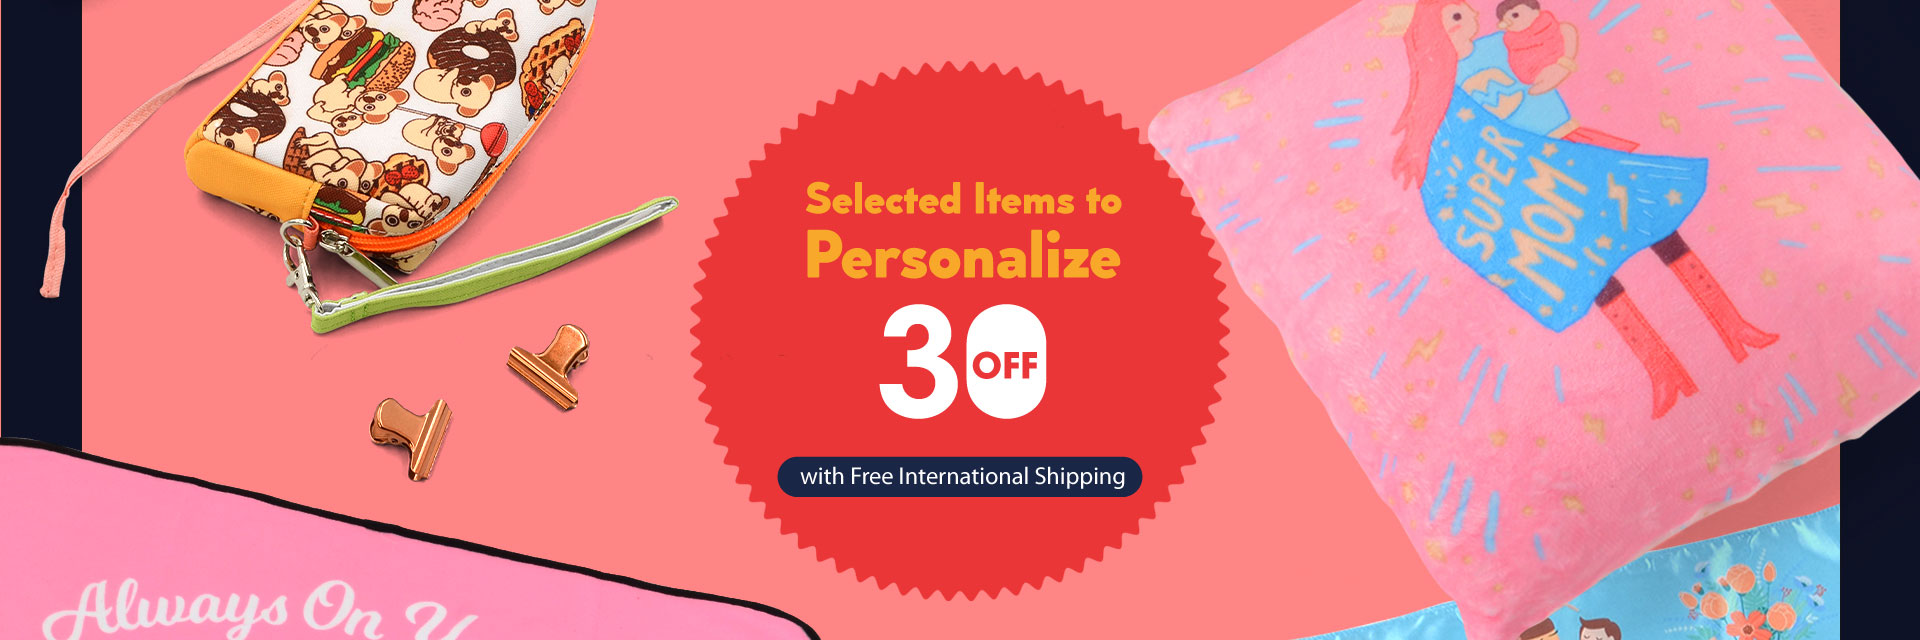 Selected Items to Personalize: 30% Off with Free International Shipping